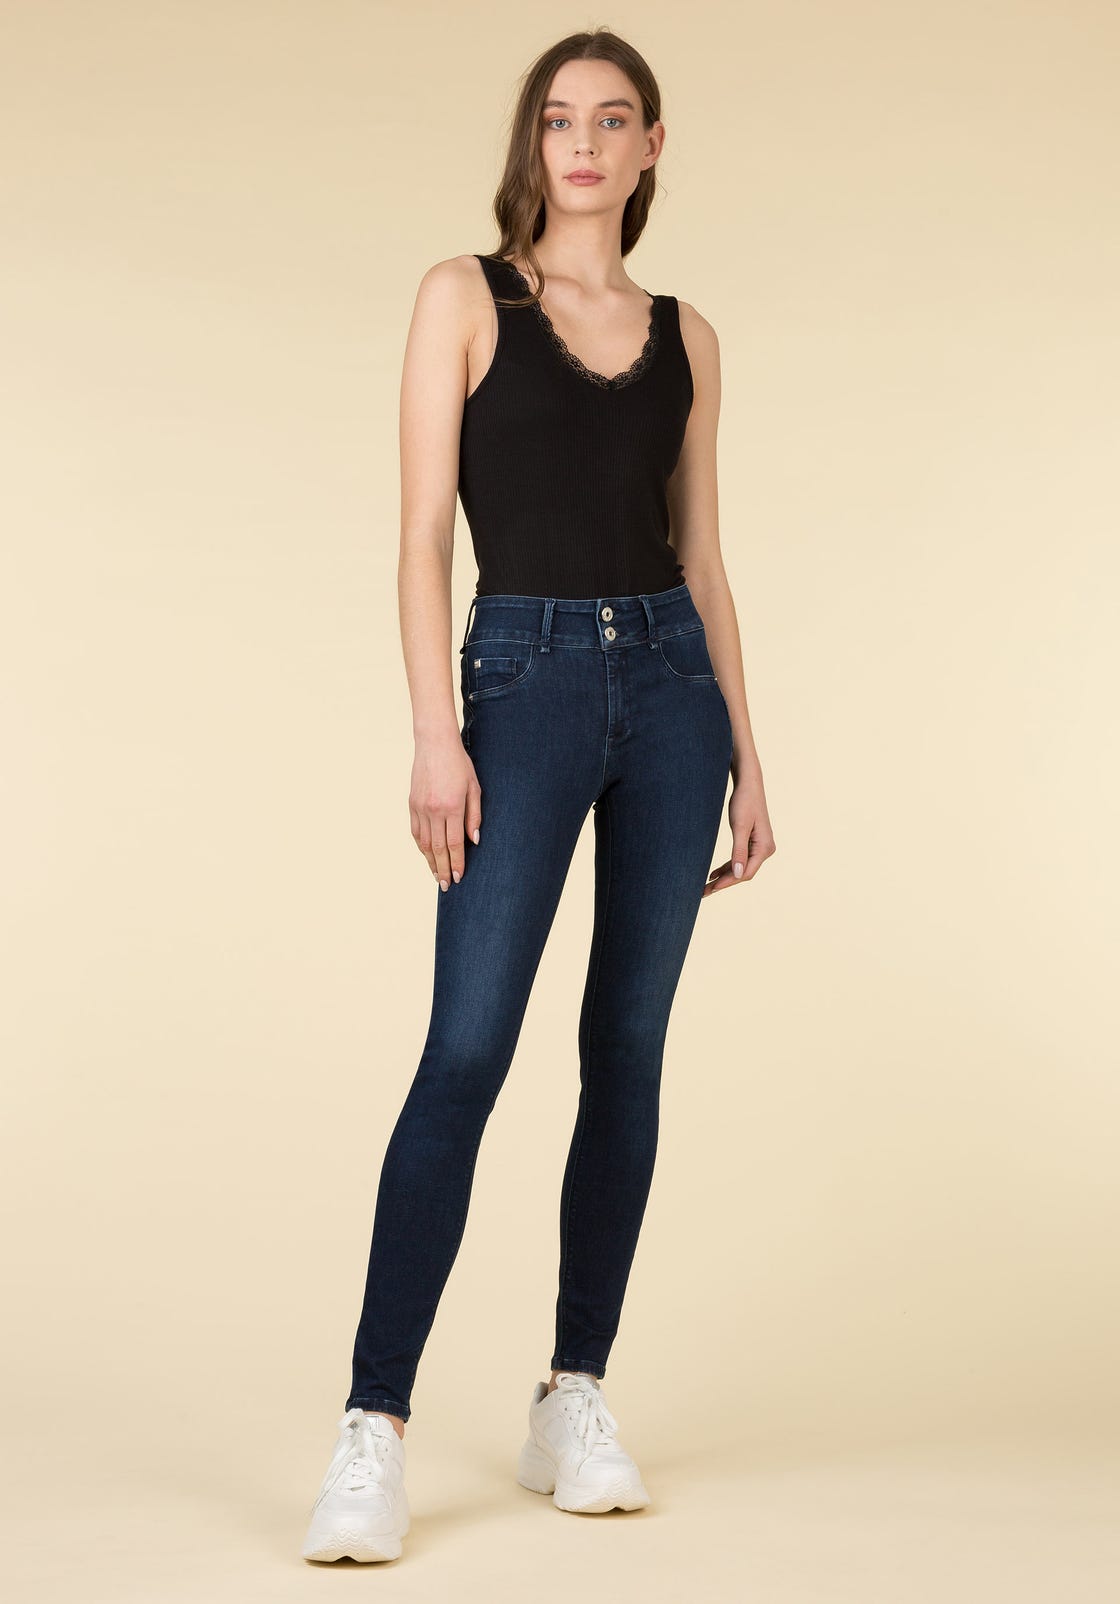 tiffosi one size fits all jeans